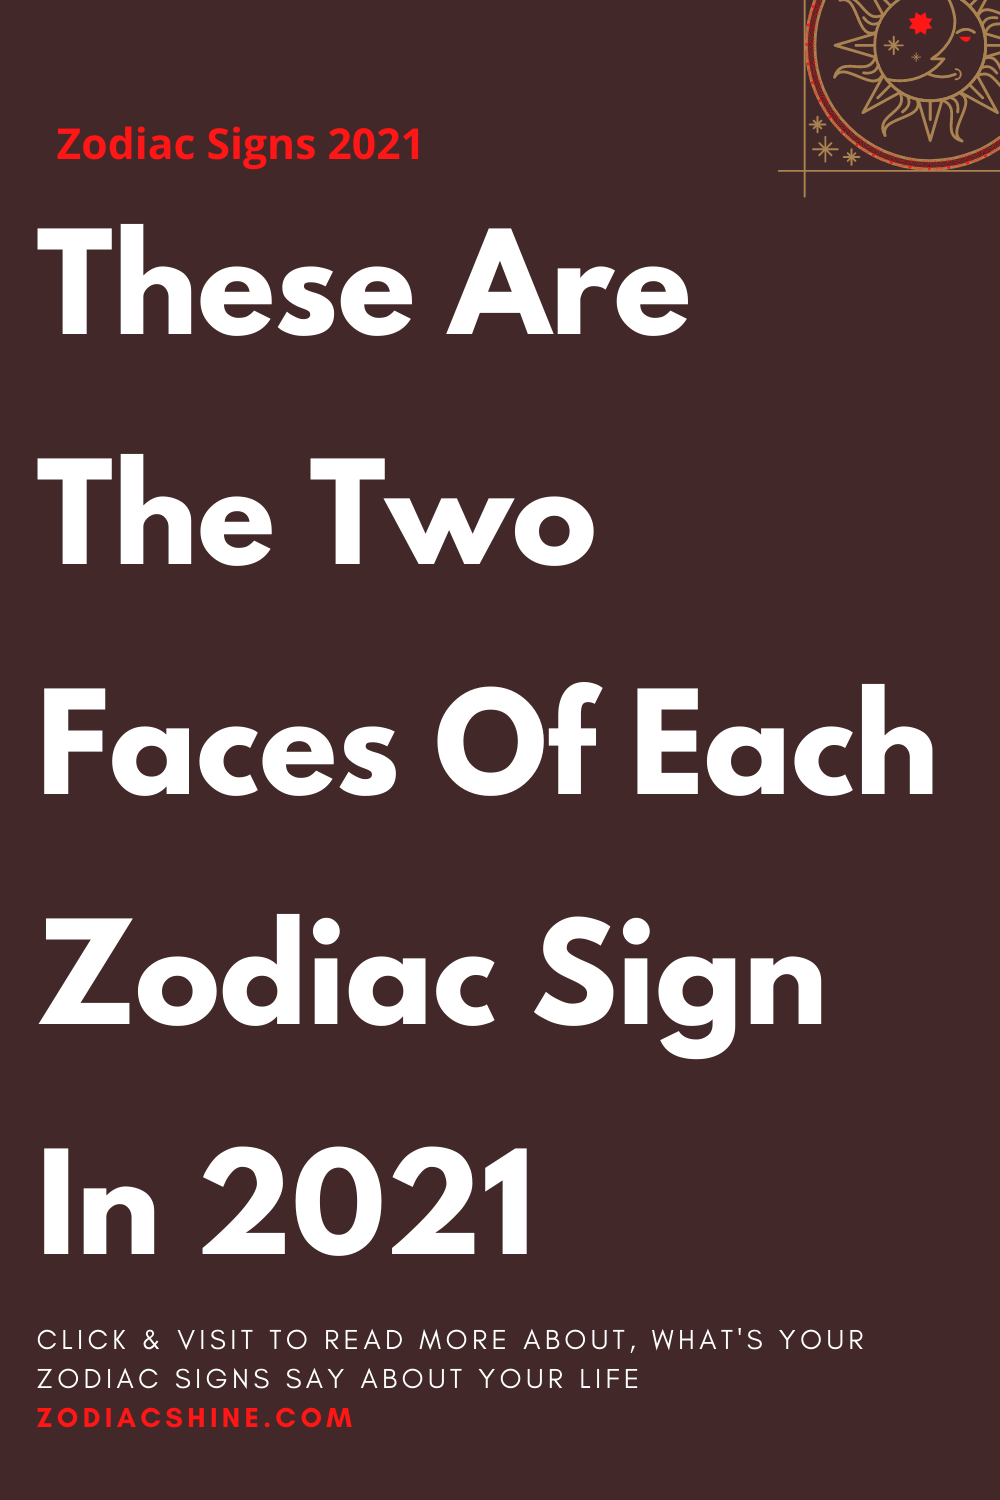 These Are The Two Faces Of Each Zodiac Sign In 2021